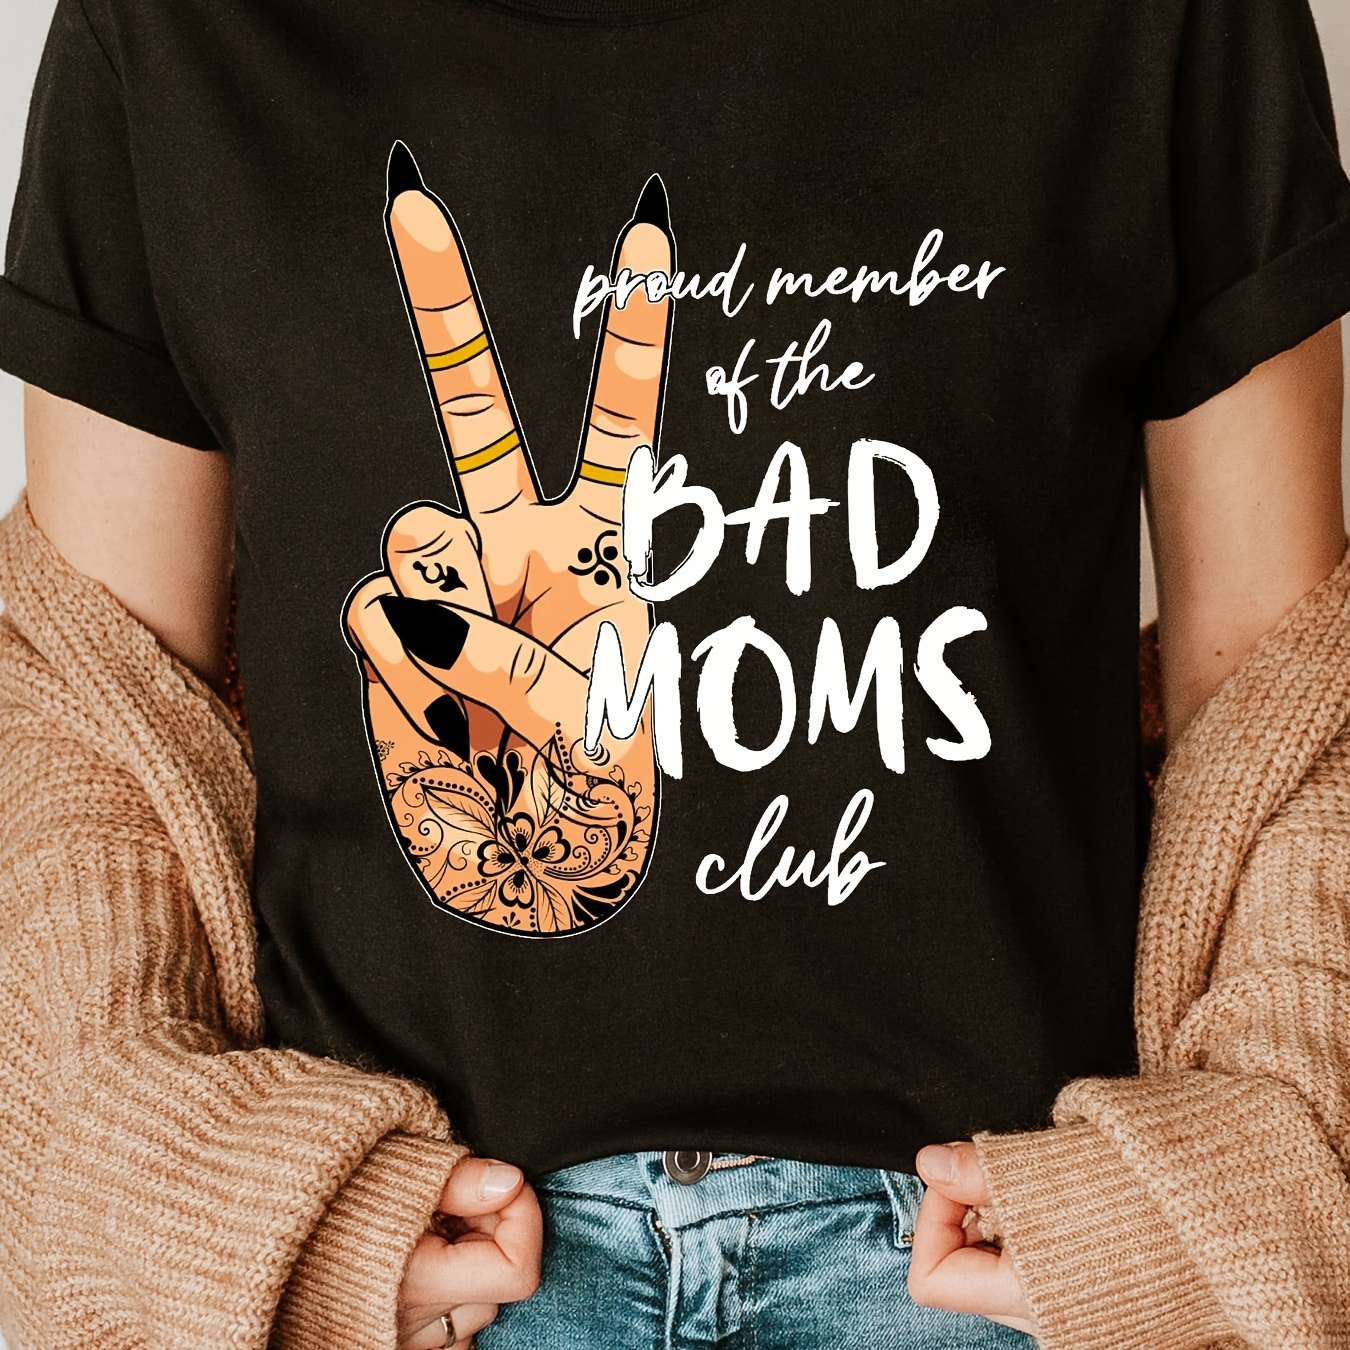 

Bad Moms Club Print Crew Neck T-shirt, Short Sleeve Casual Top For Summer & Spring, Women's Clothing